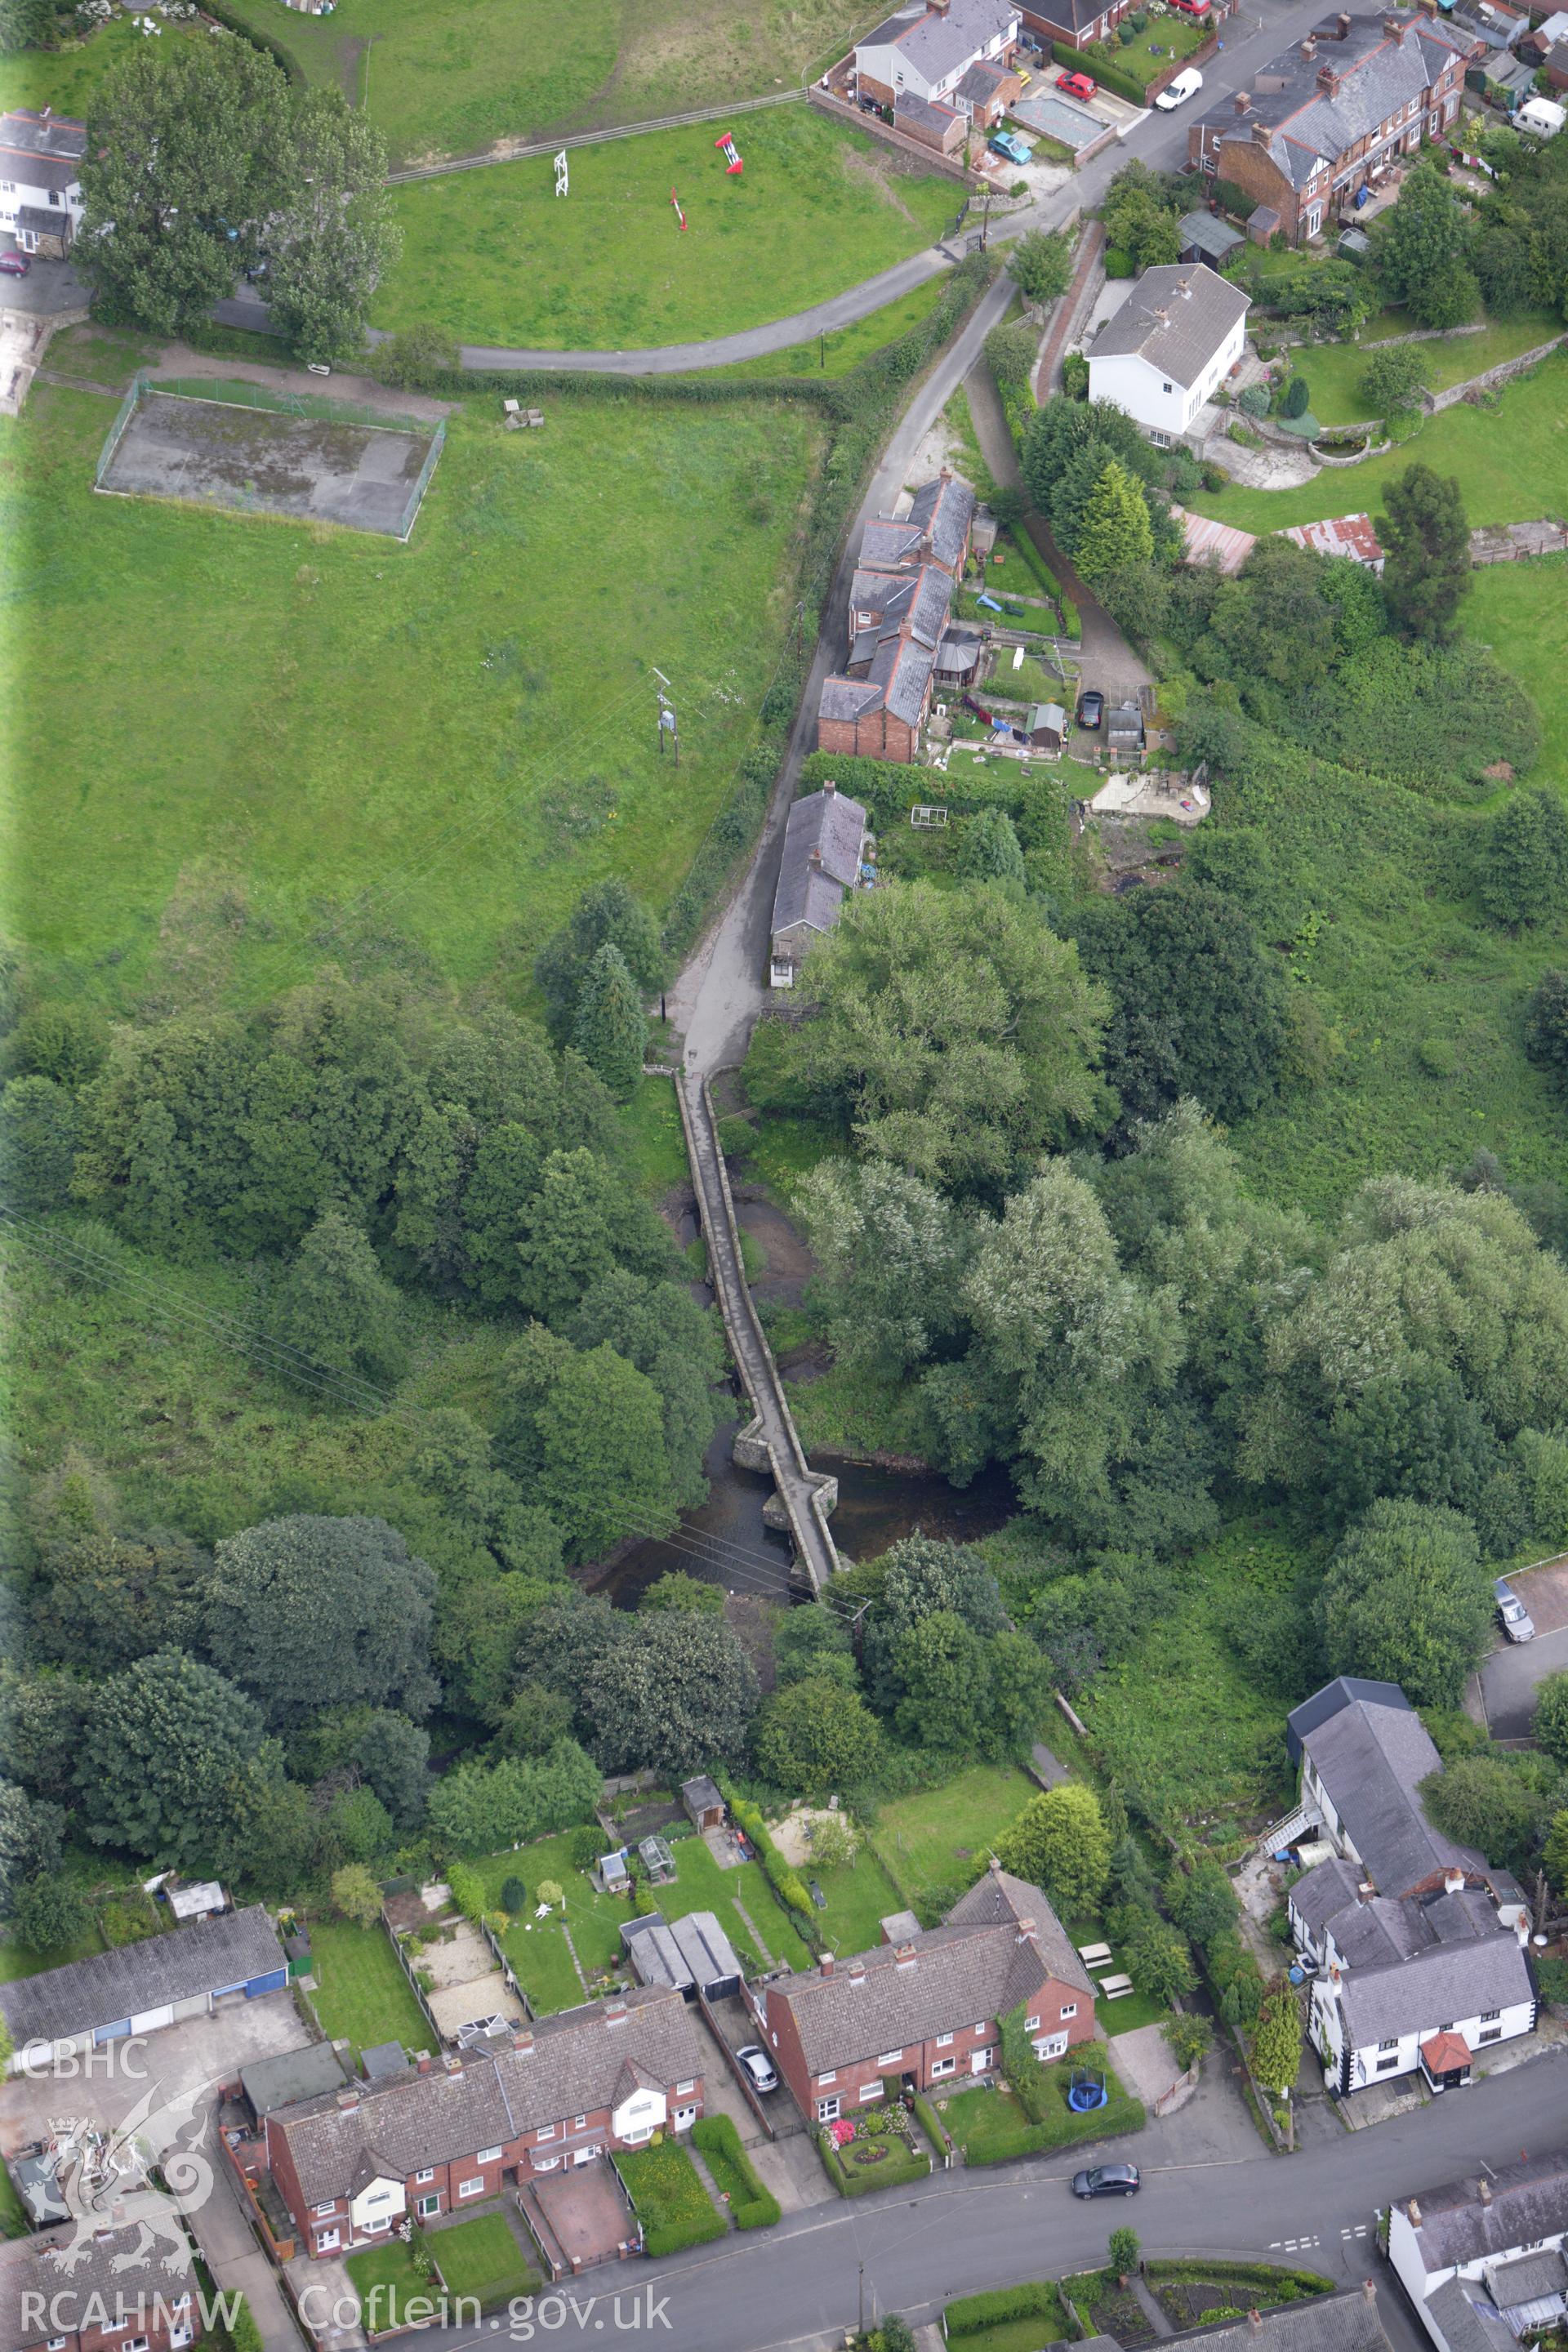 RCAHMW colour oblique aerial photograph of Caergwrle Bridge. Taken on 30 July 2009 by Toby Driver